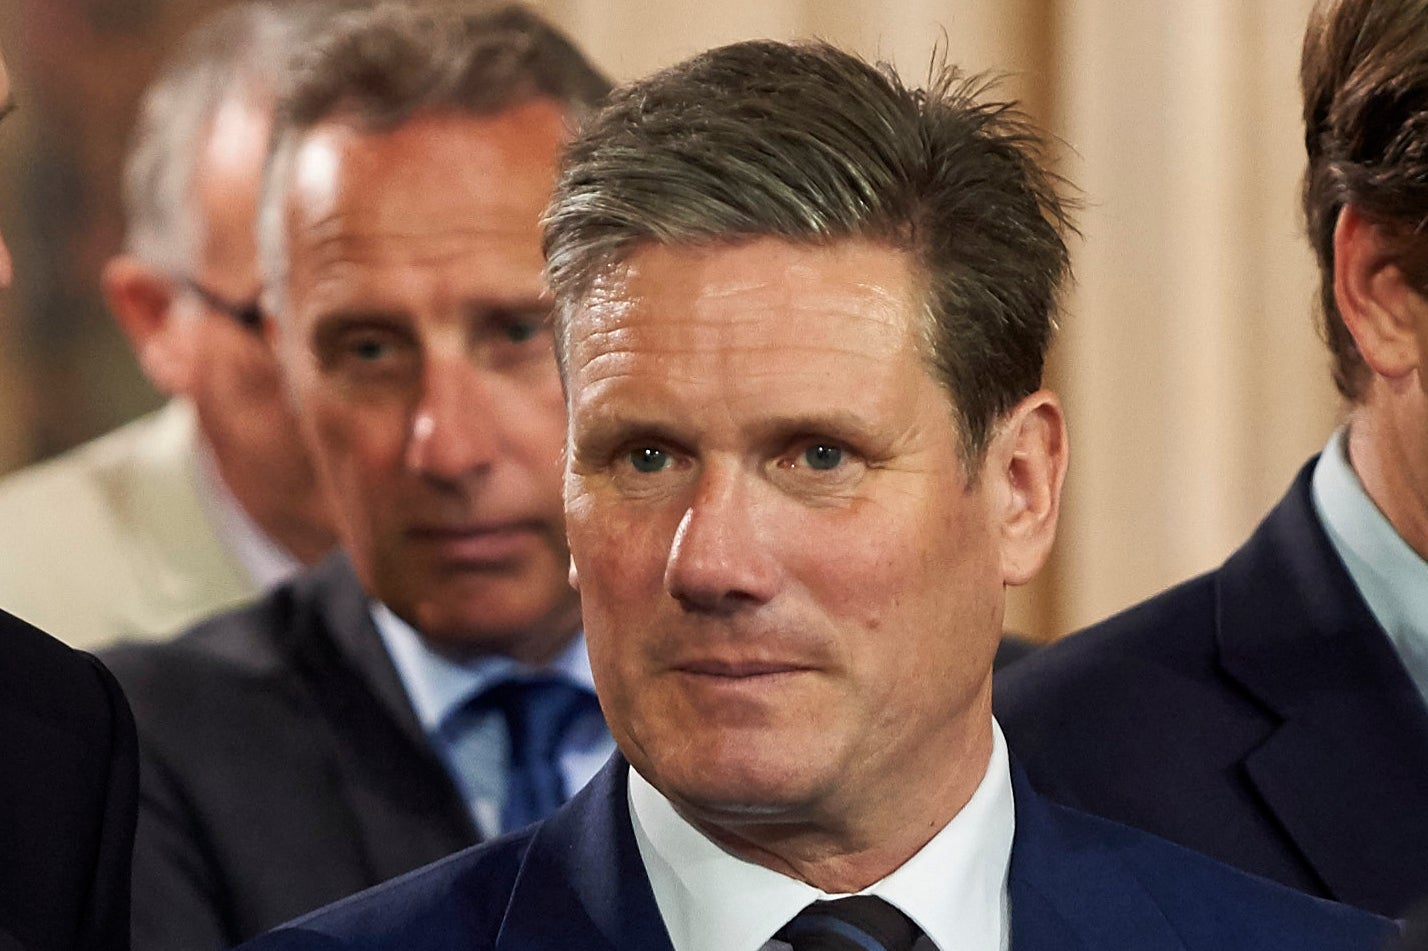 Over the summer, Mr Starmer solidified his party’s position on Brexit